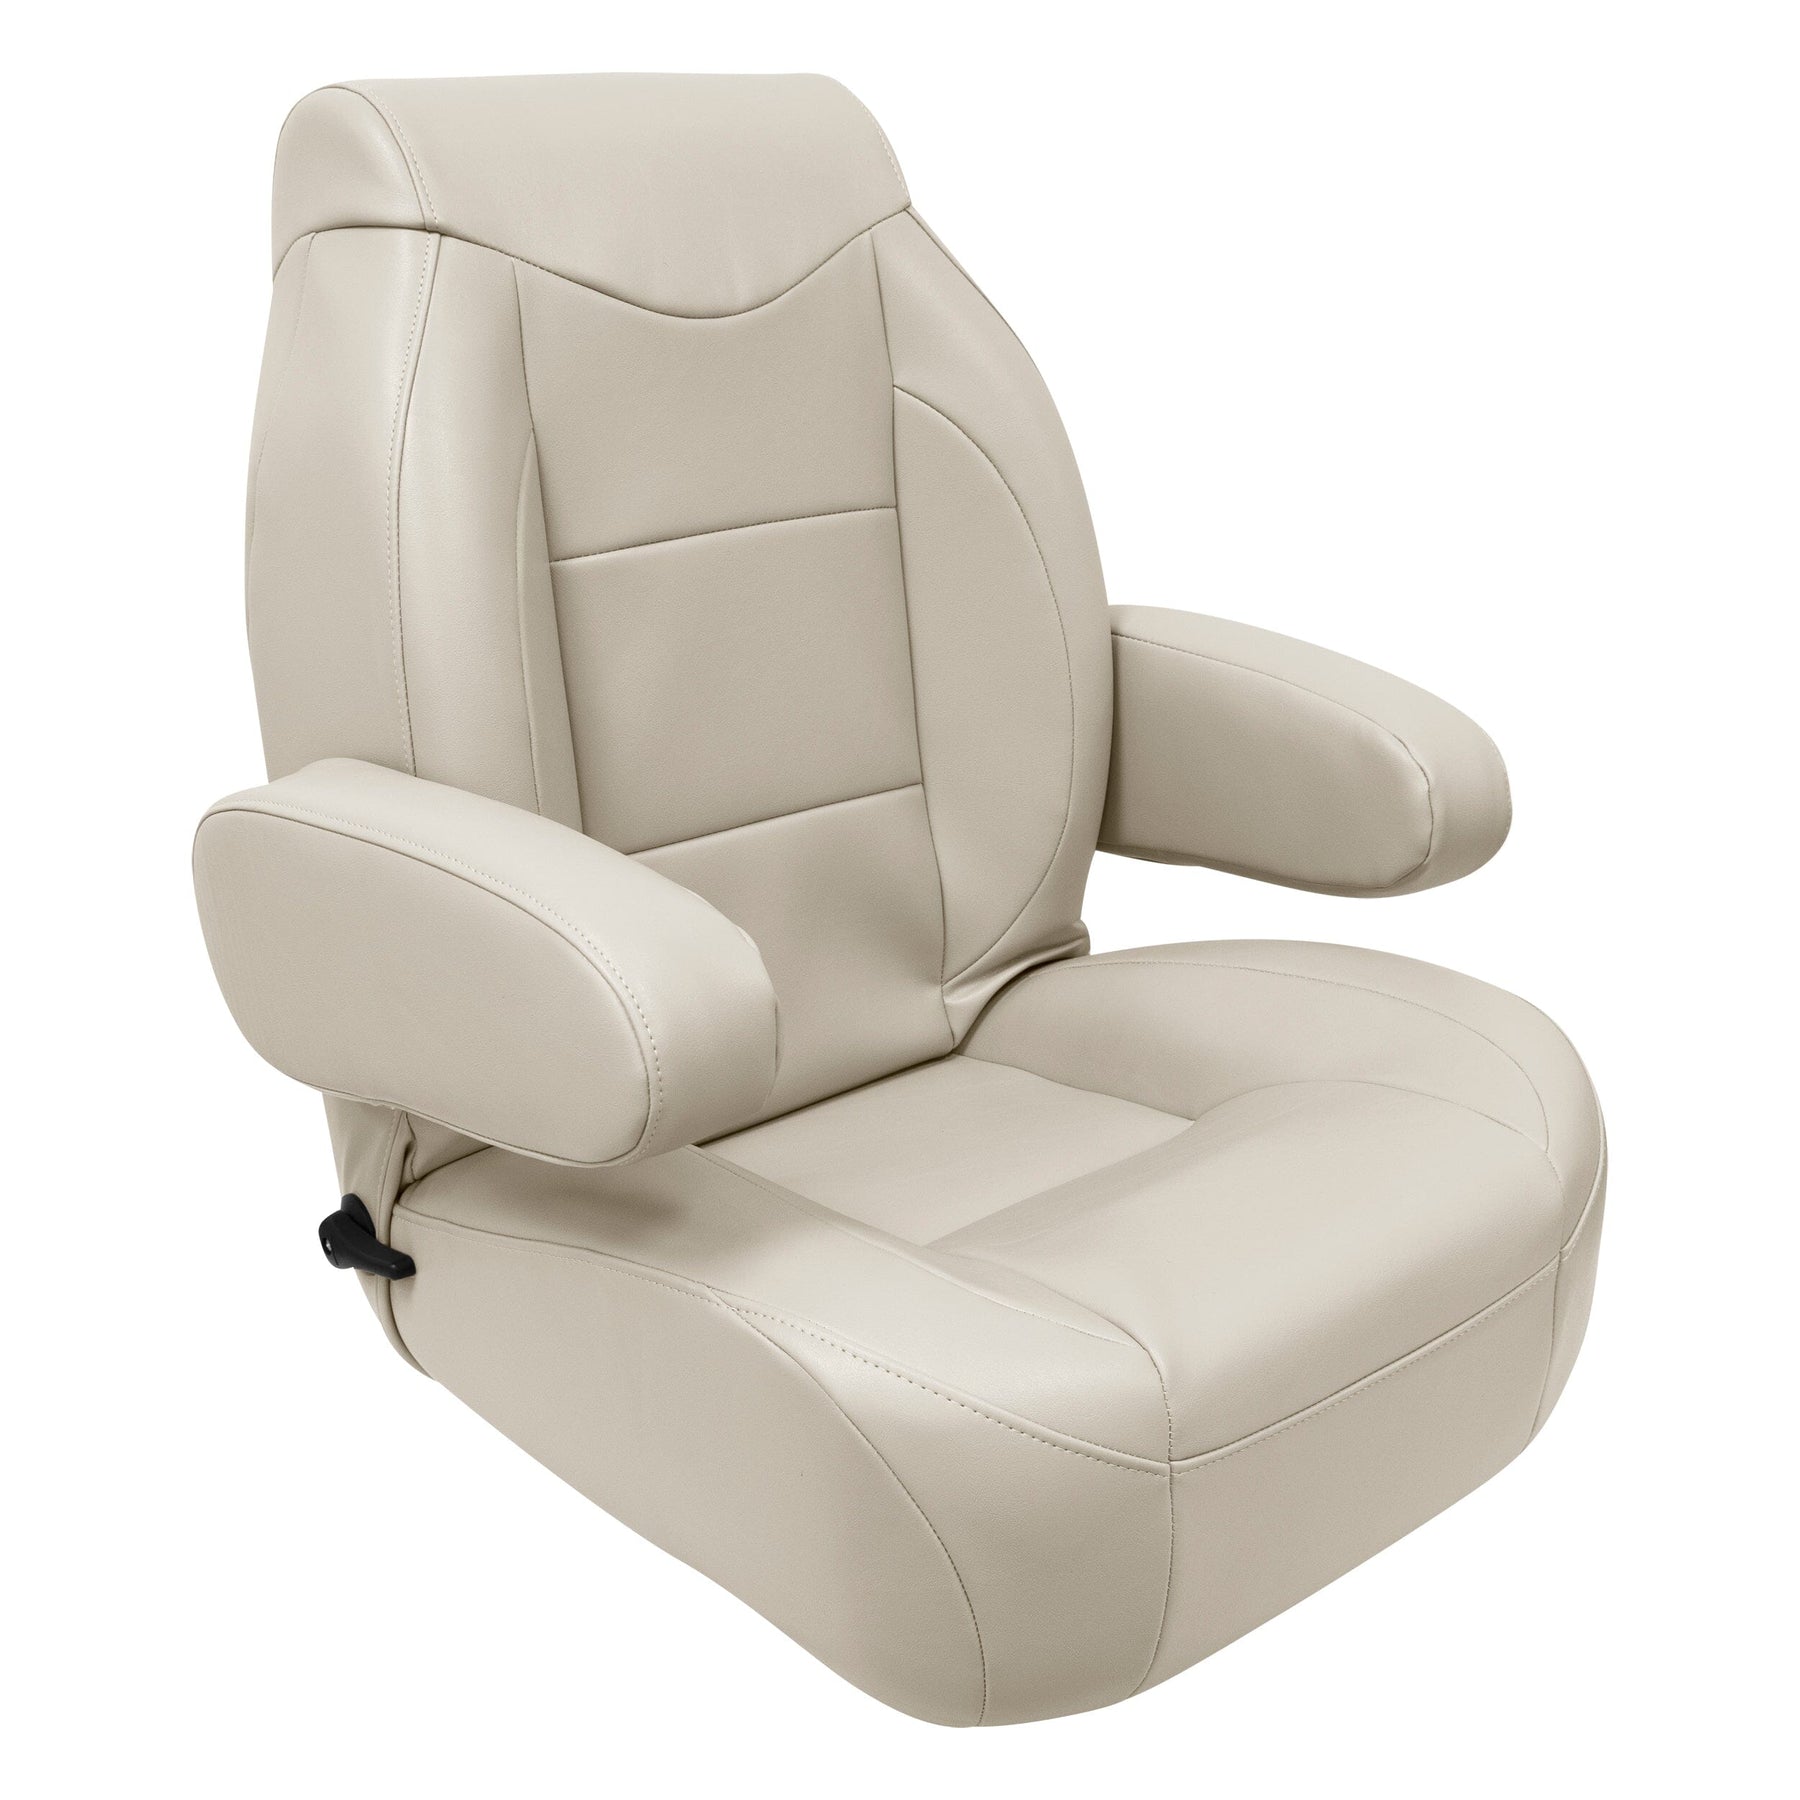 Wise 3126 High Back Pontoon Reclining Helm w/ Flip Up Arm Rests – Boatseats